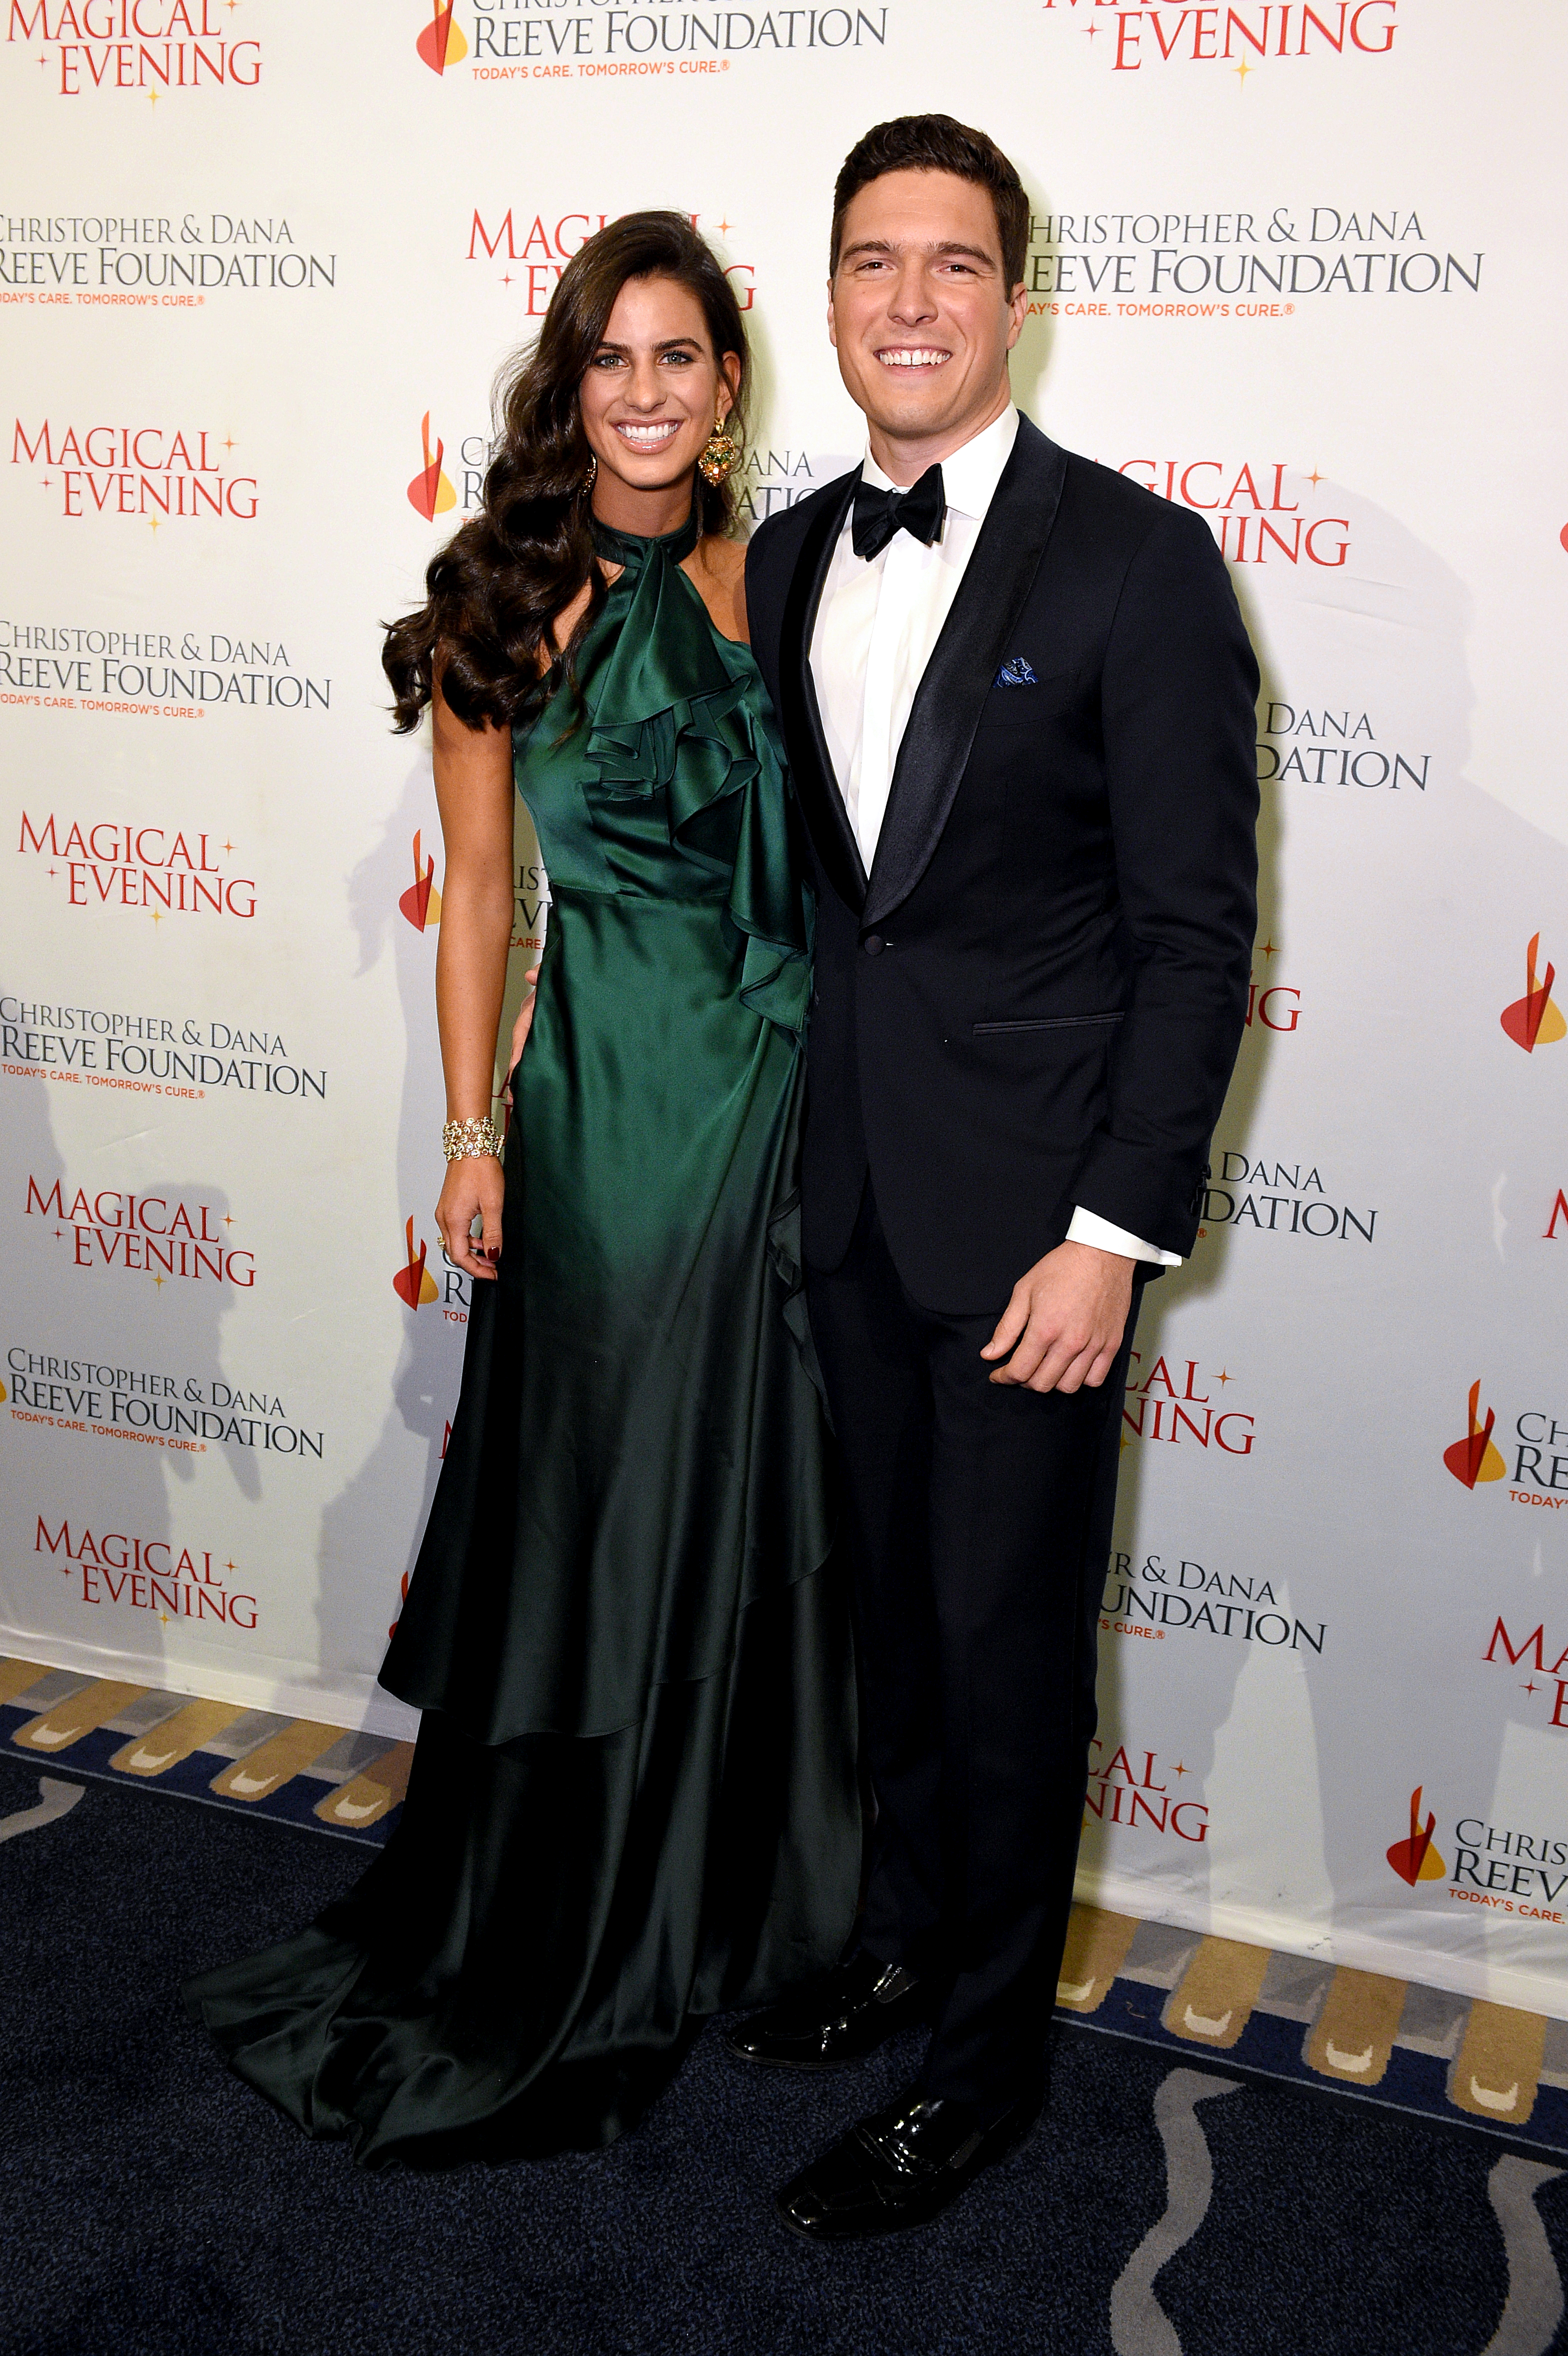 Will Reeve (R) and Amanda Dubin arrive at the 2019 Christopher & Dana Reeve Foundation Gala at Cipriani South Street on November 14, 2019 in New York City | Source: Getty Images